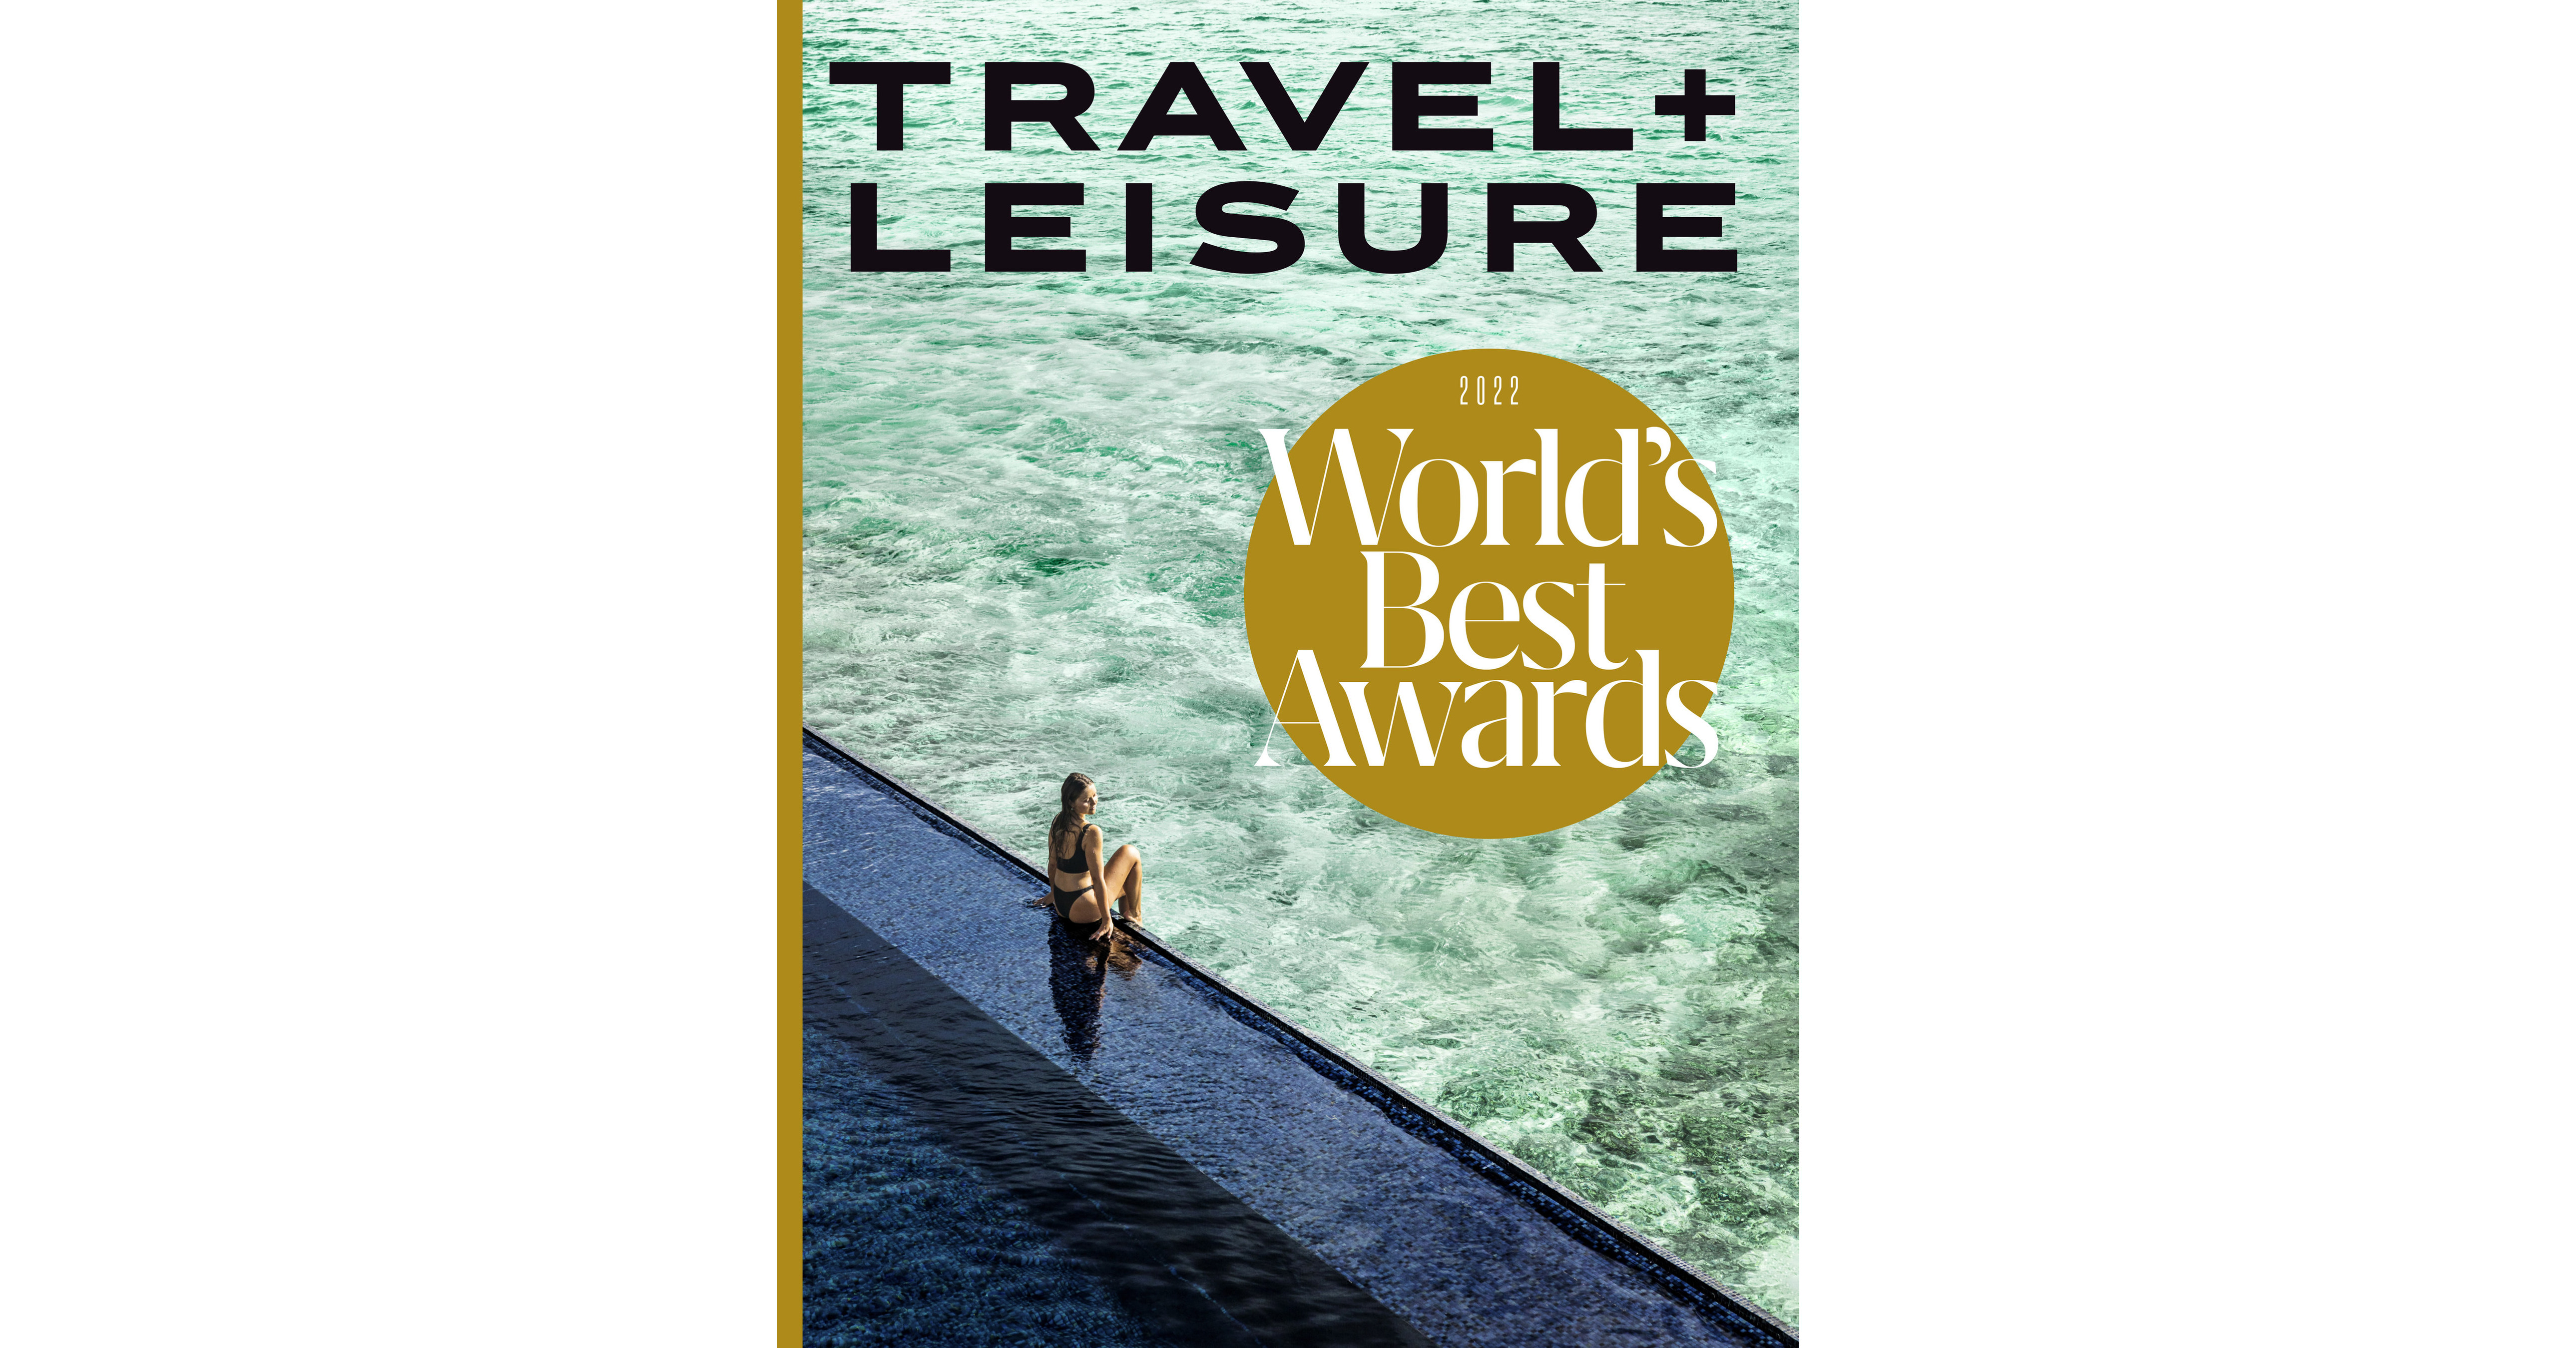 Travel + Leisure Announces Its 2022 World’s Best Awards Revealing The Top Cities, Islands, Hotels, Cruise Lines, Airlines + More